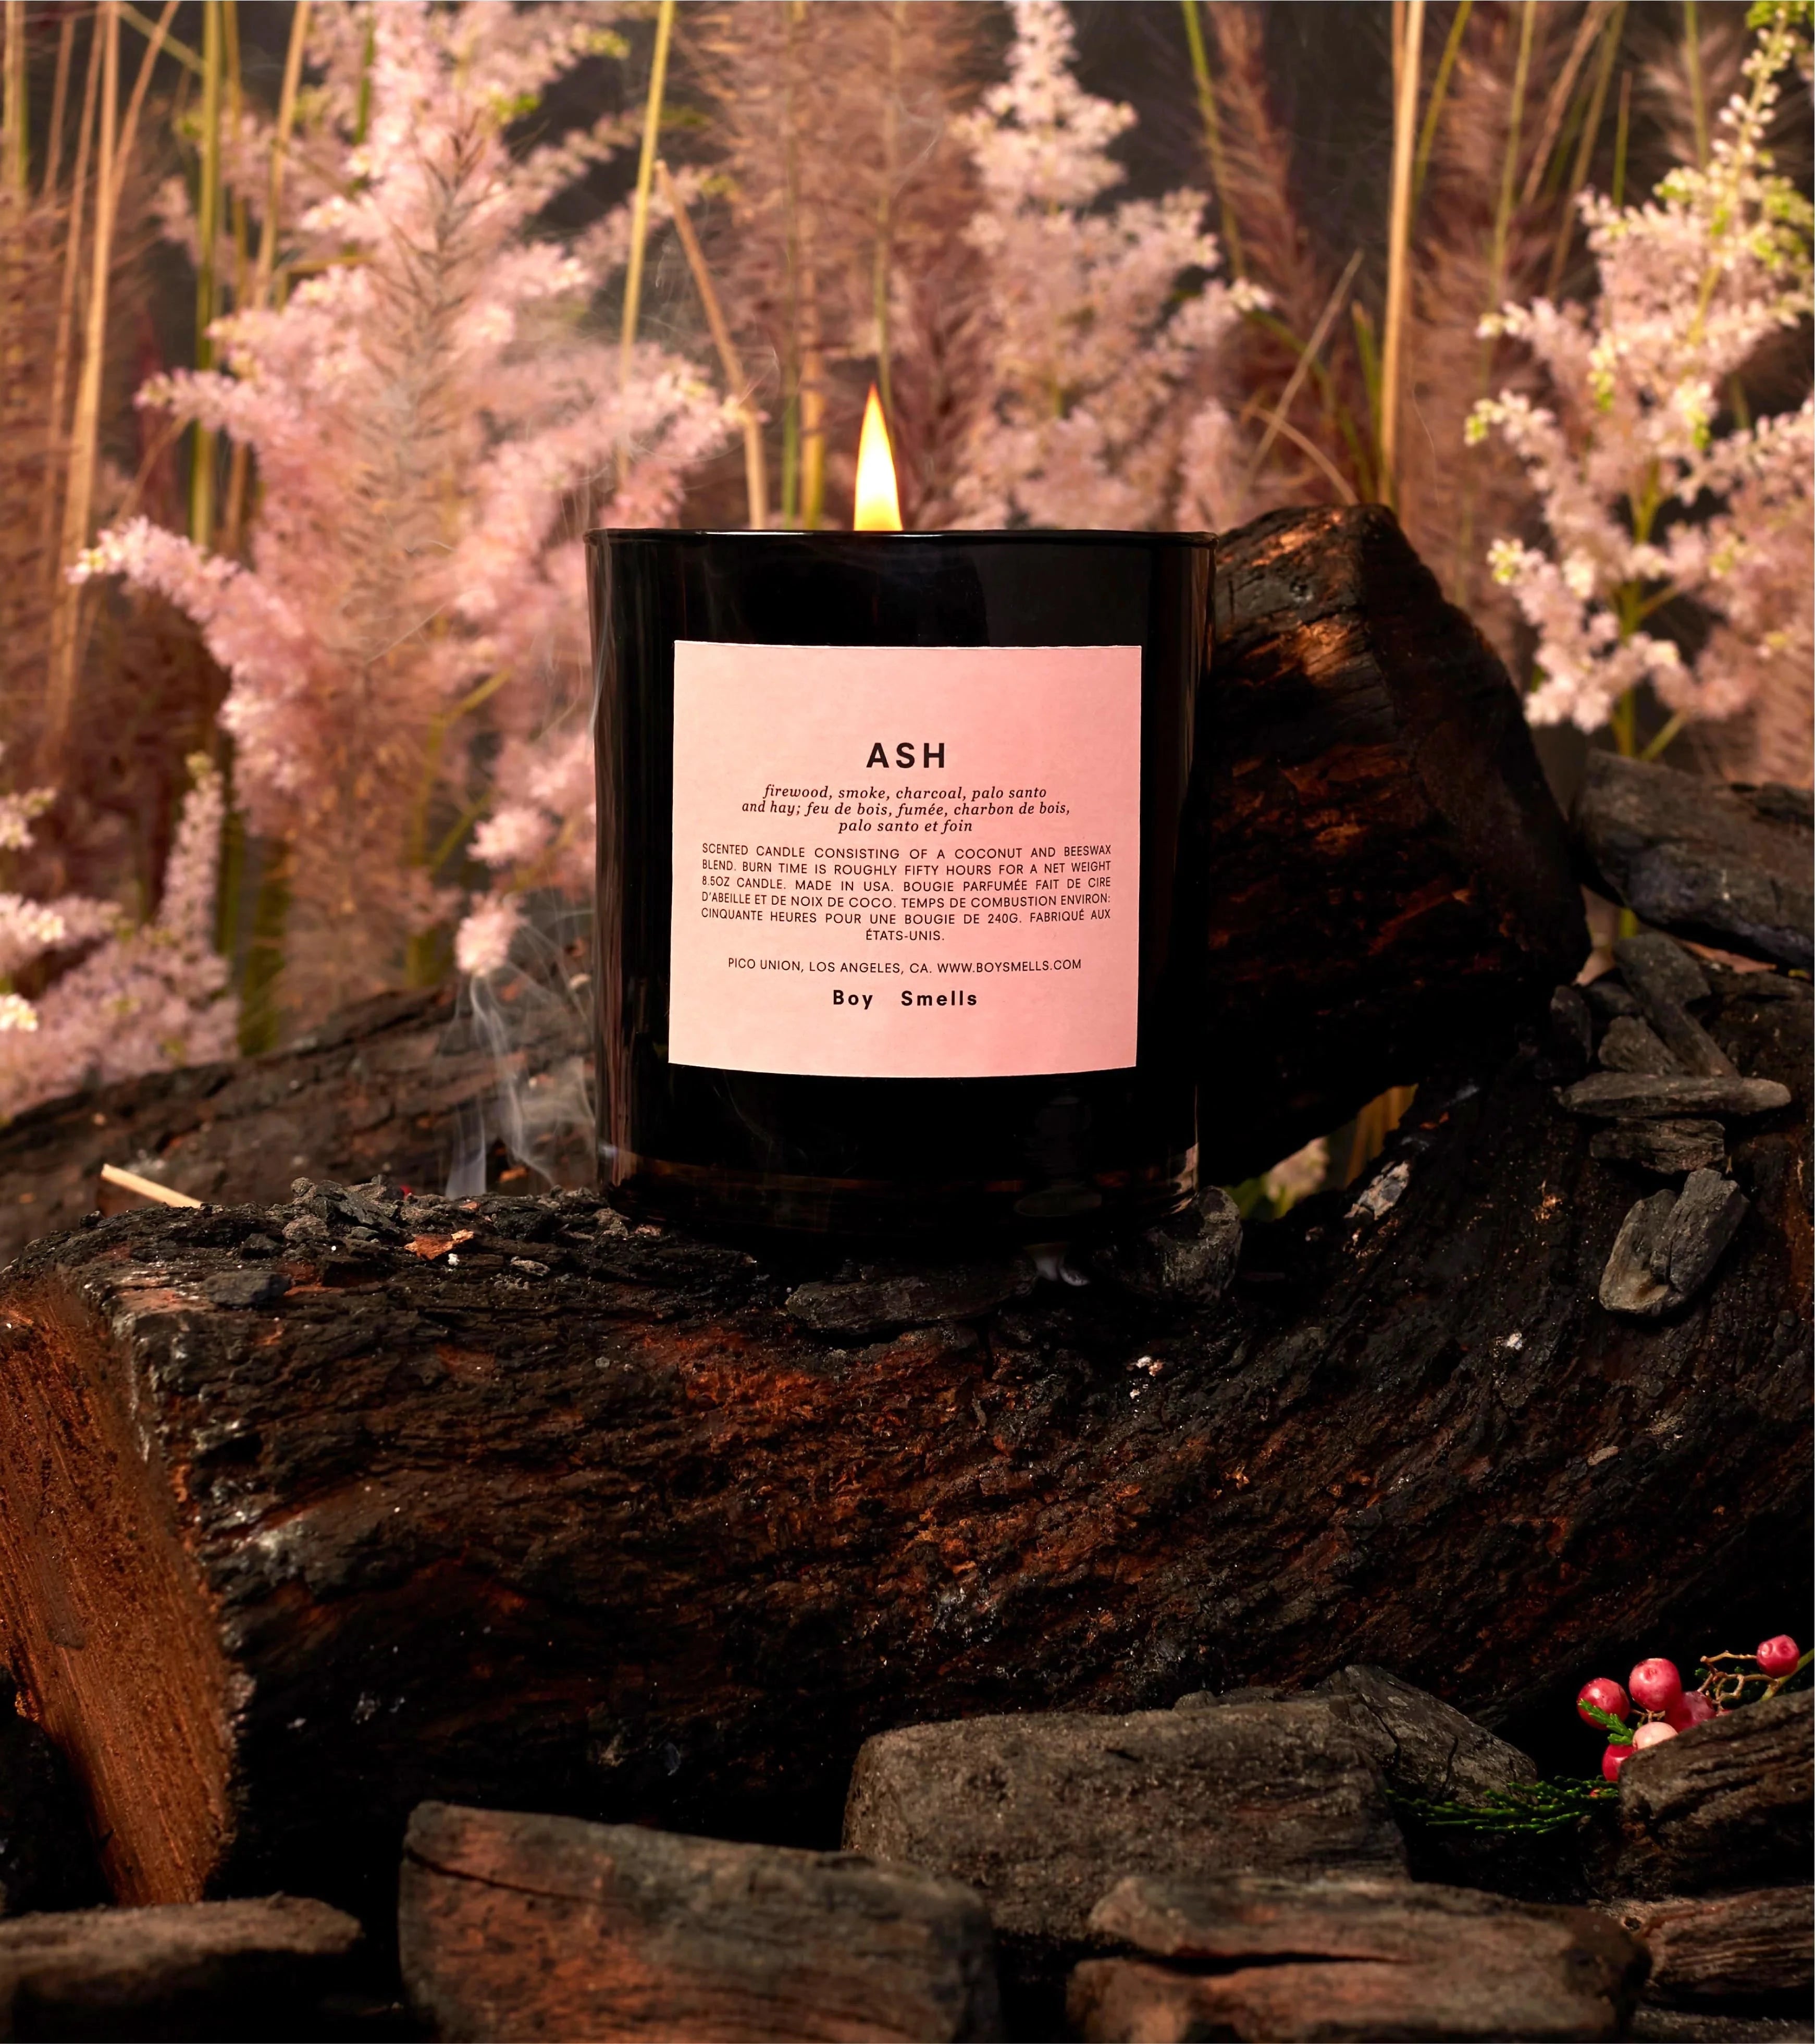 pink woodsy background with black candle on fire wood. candle has pink label on the center